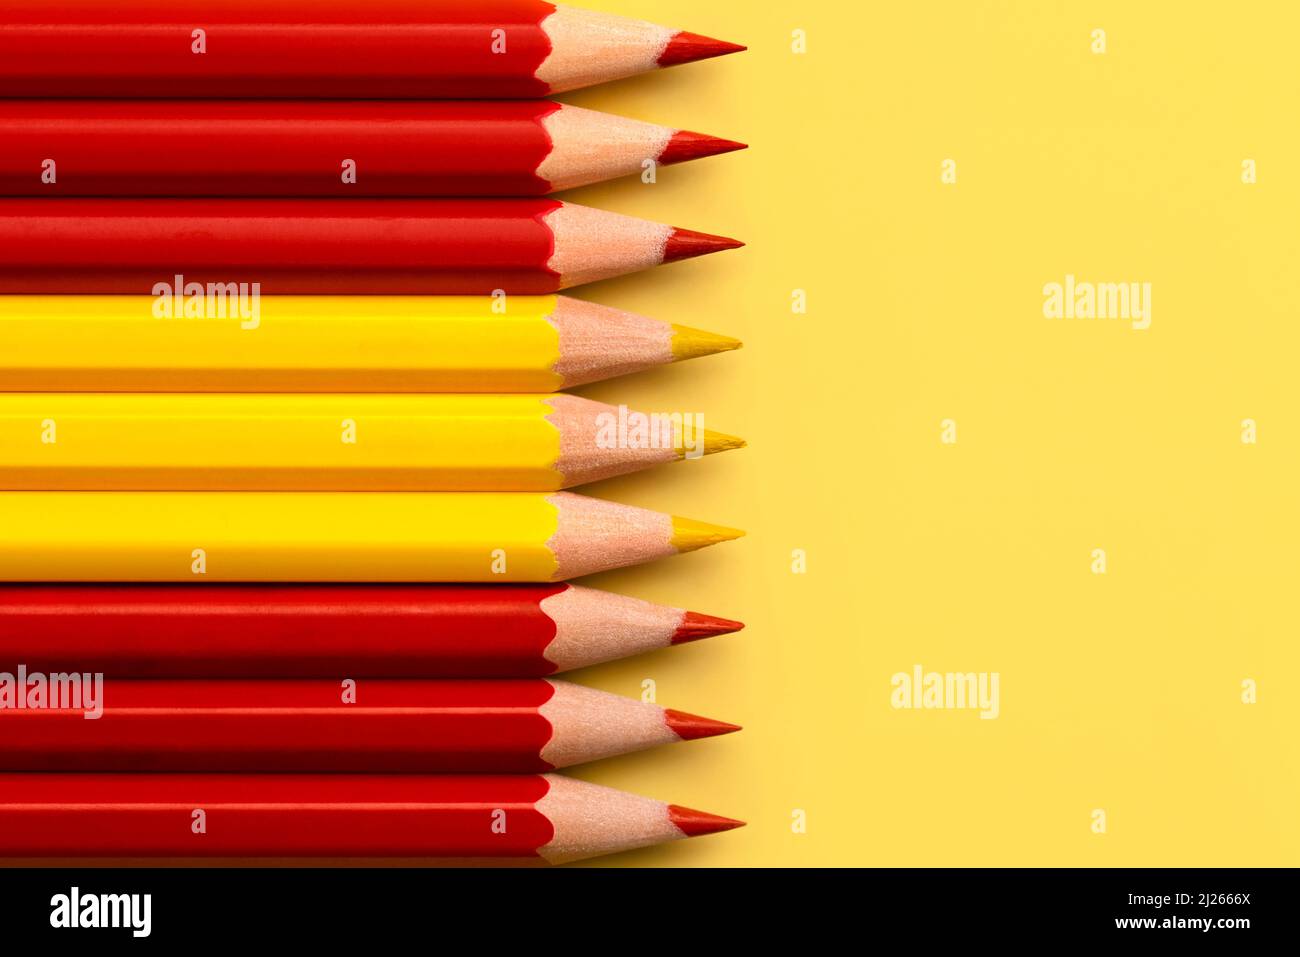 Top view of Spain flag made with red and yellow colored pencils with copy space over yellow background Stock Photo